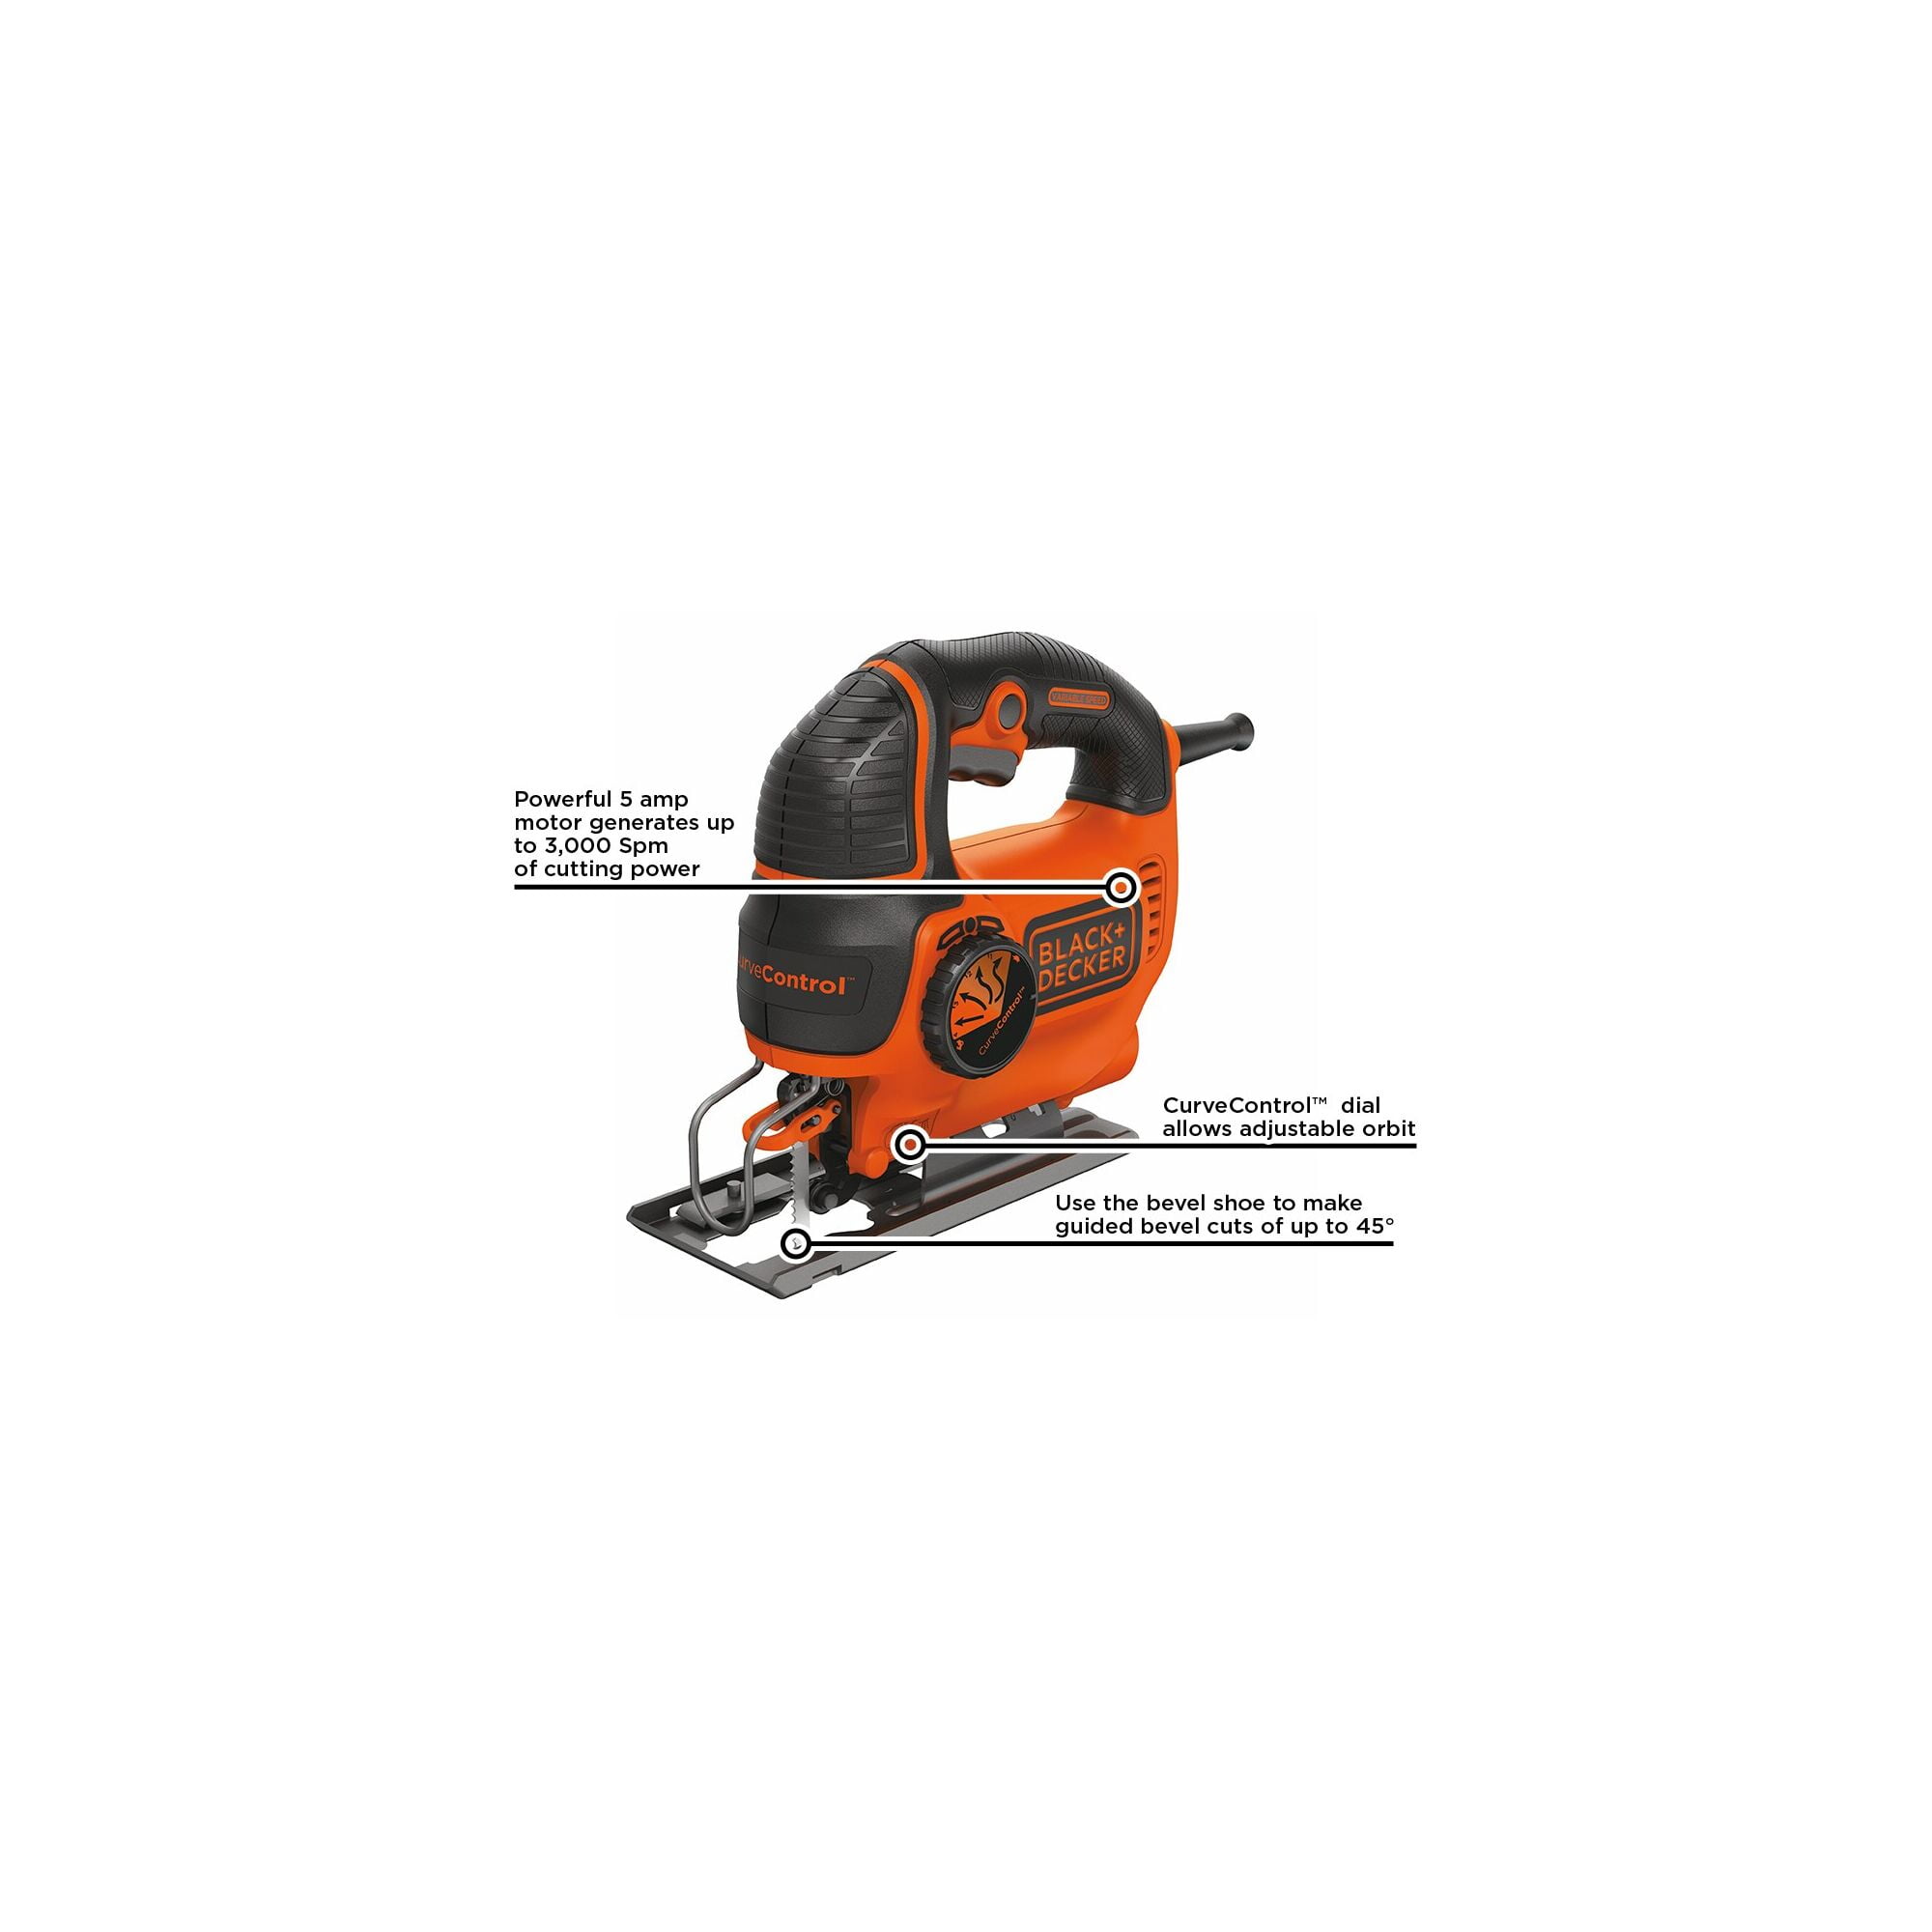 BLACK+DECKER Jig Saw, Smart Select, 5.0-Amp with Workmate Portable